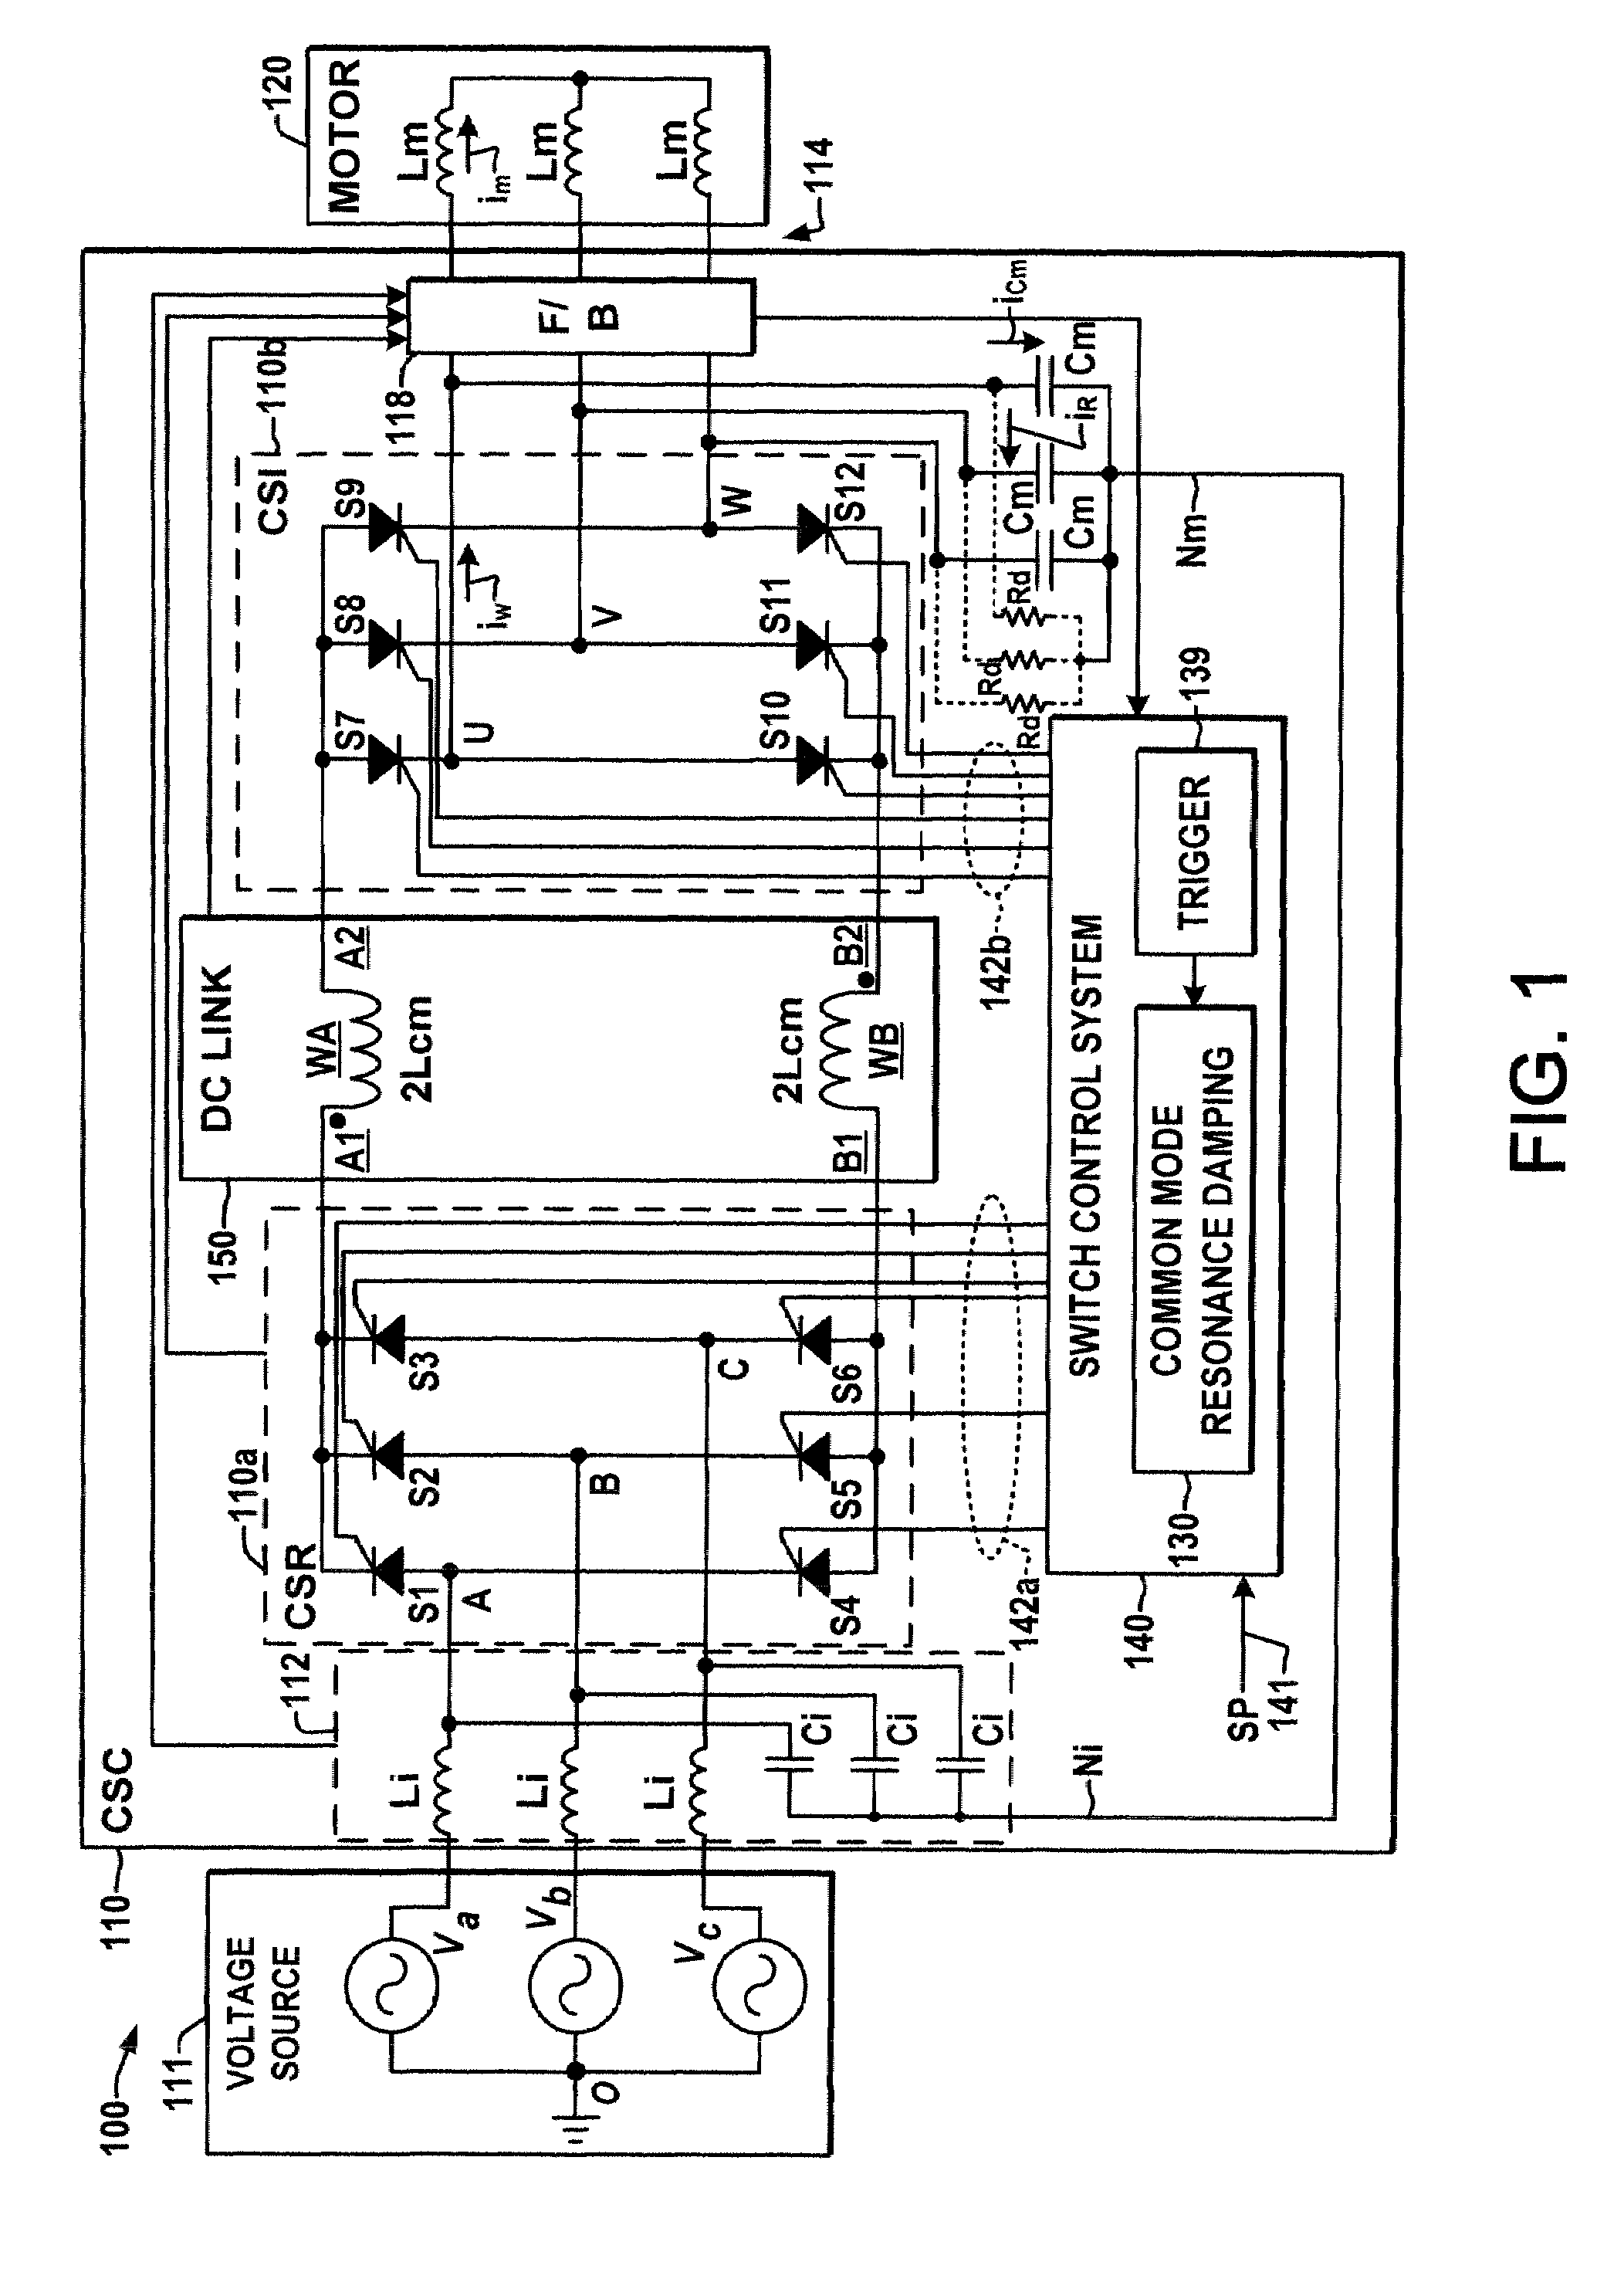 Power conversion system and method for active damping of common mode resonance